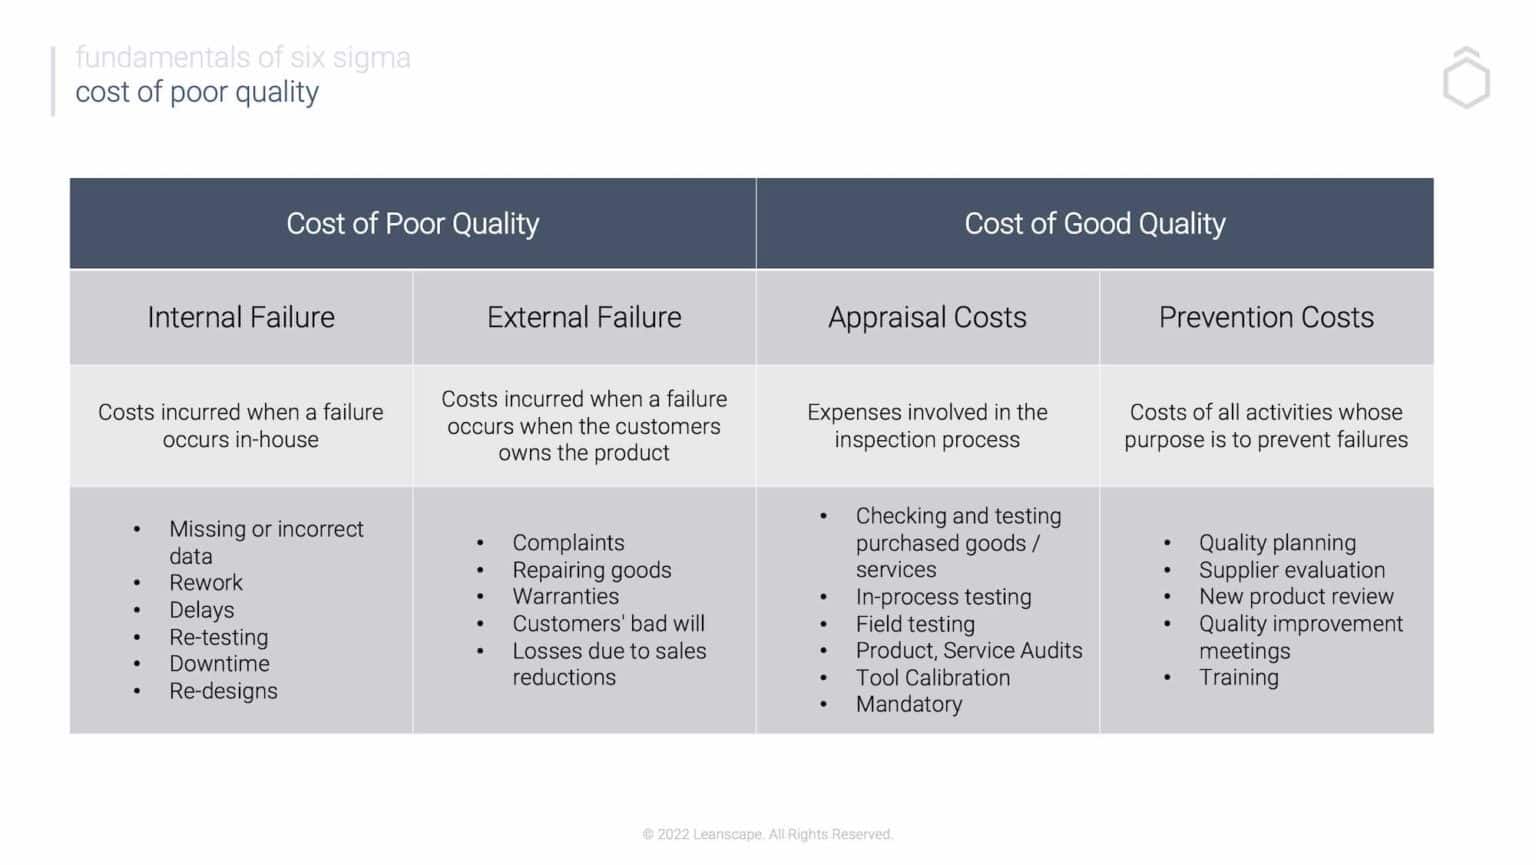 Cost of Poor Quality vs Good Quality